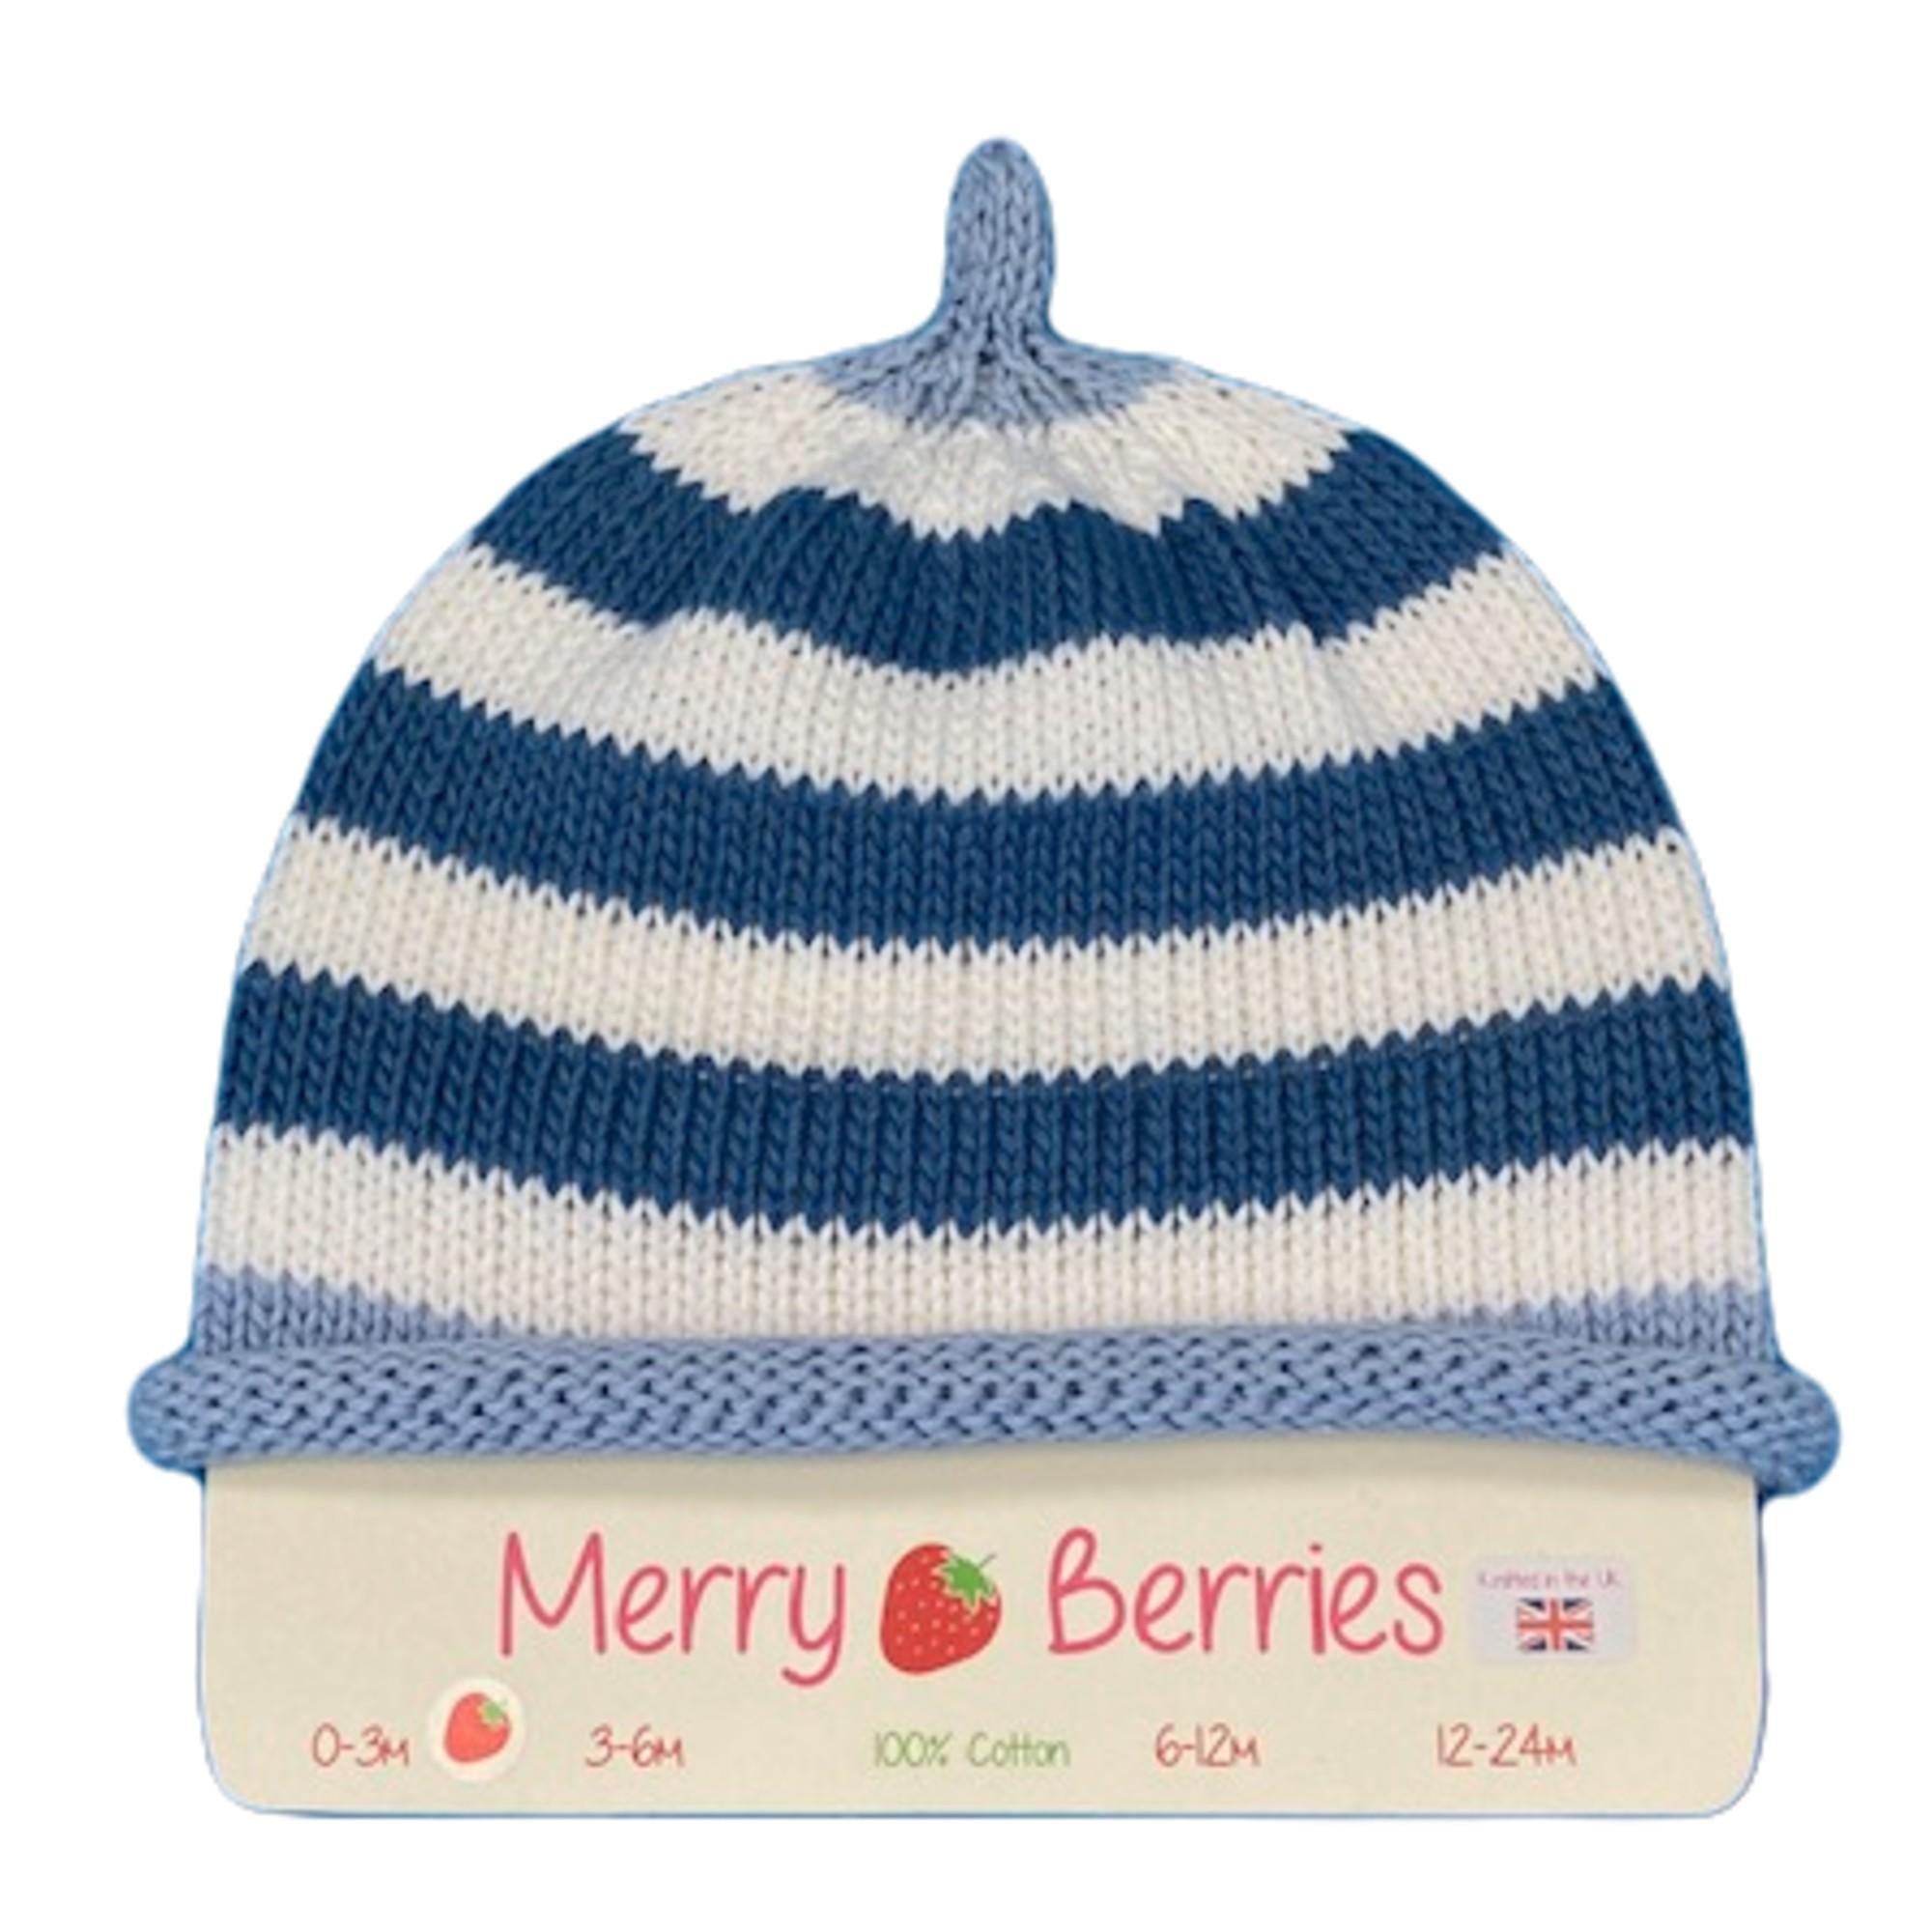 Merry Berries- Sky white royal striped Knitted Baby Hat- 0-24 Months- Cotton